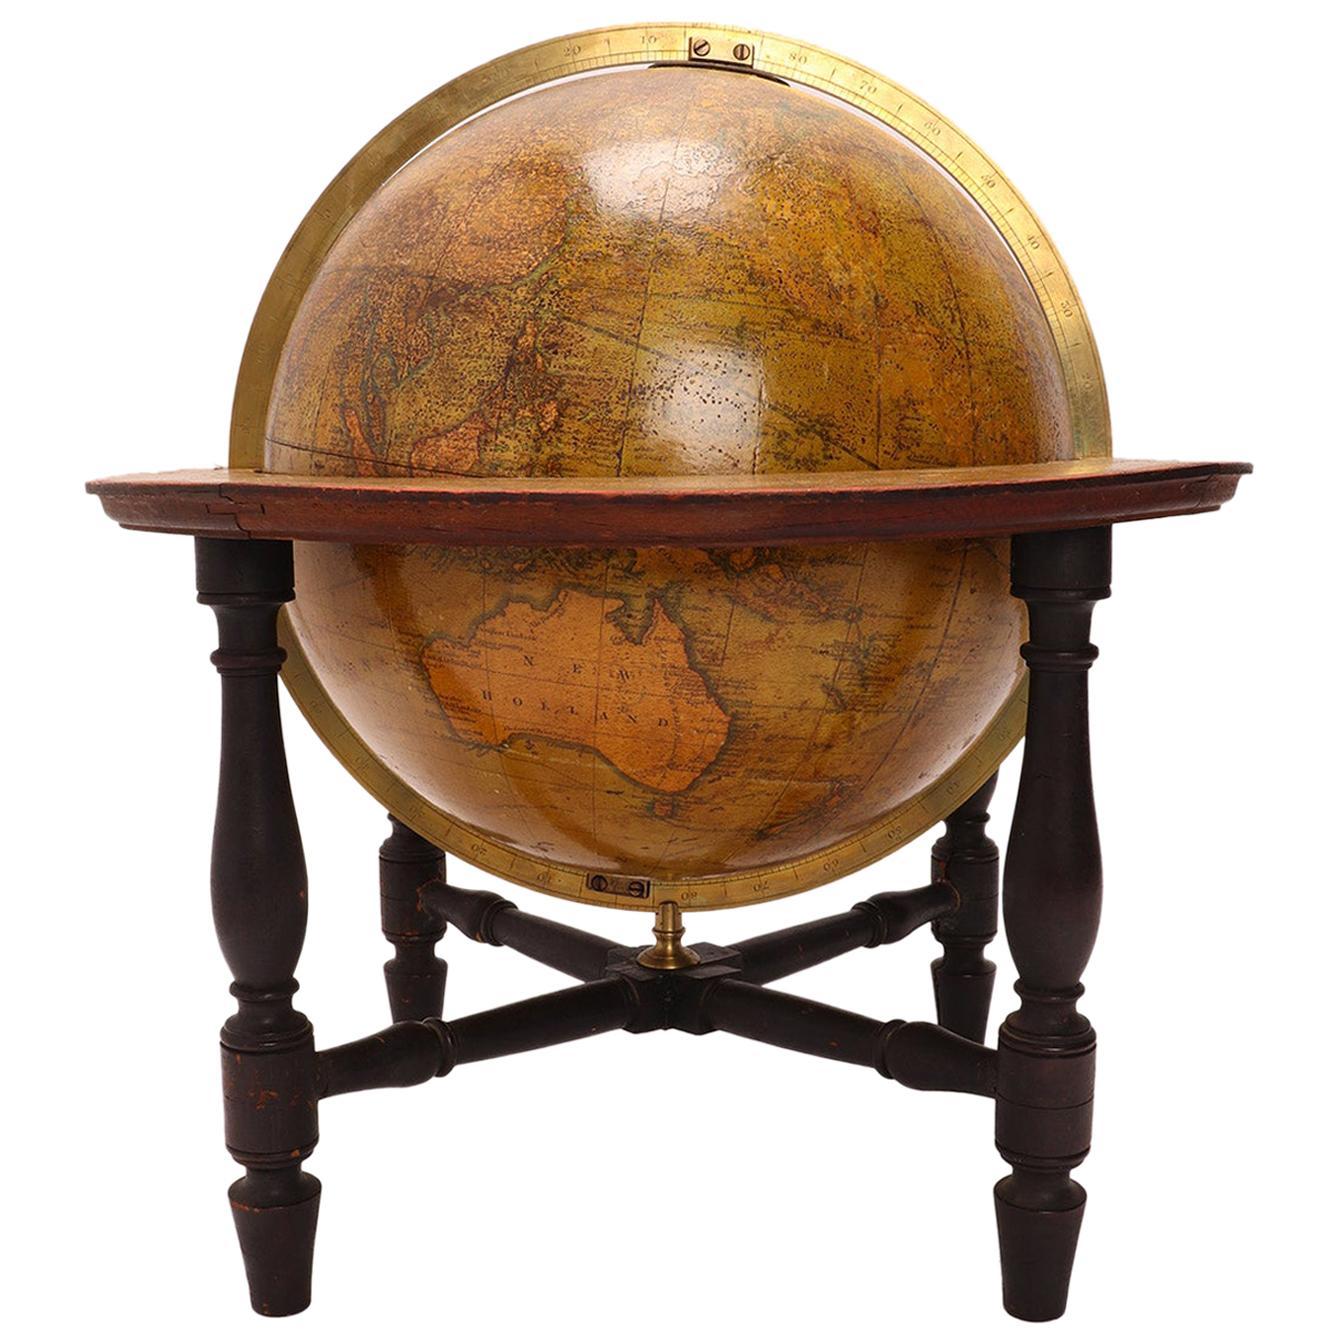 Terrestrial Globe Signed Cary, London, 1800